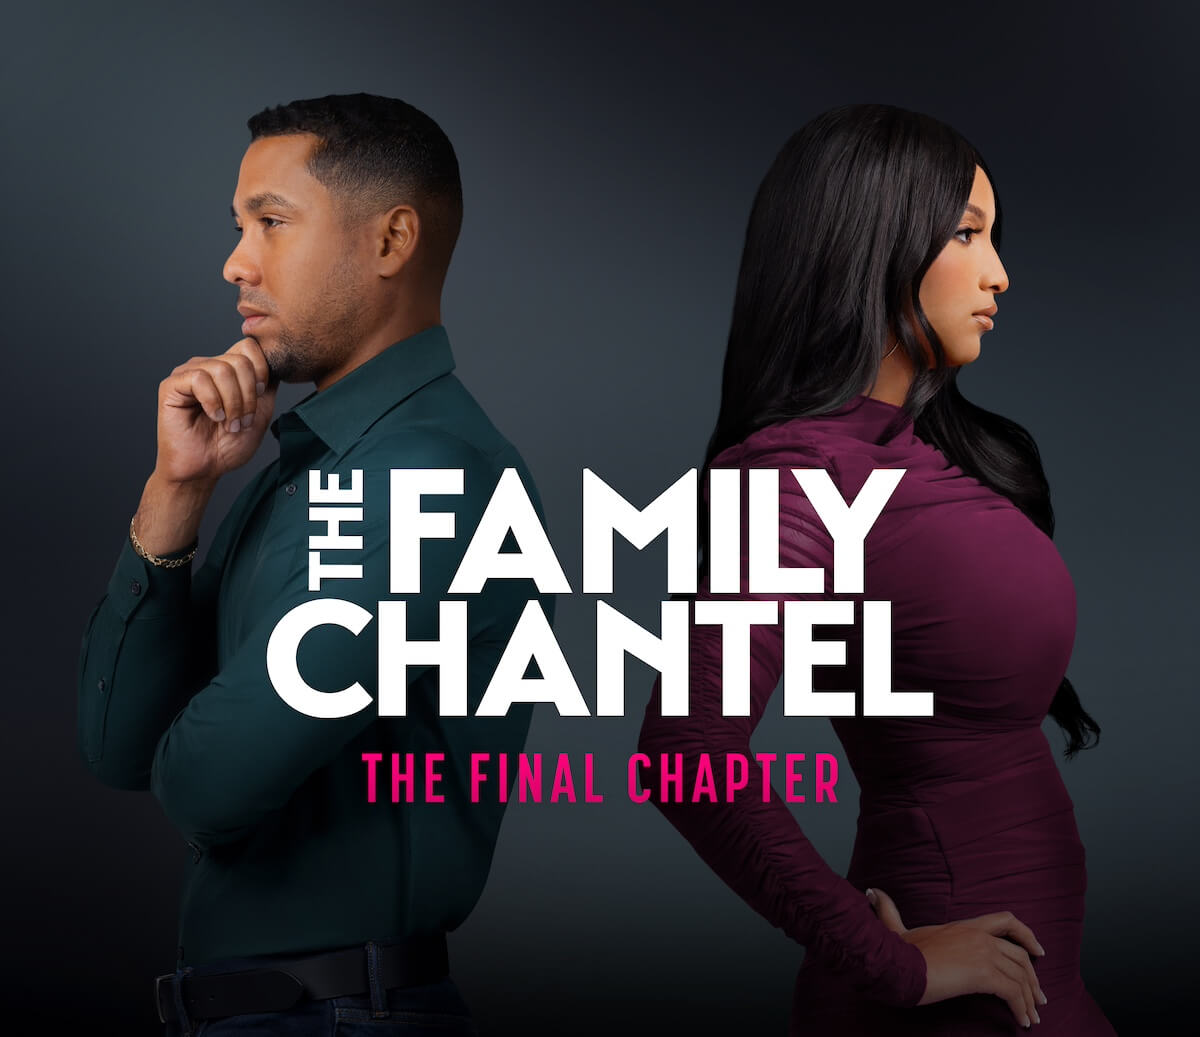 Pedro and Chantel back to back in key art for 'The Family Chantel' Season 5